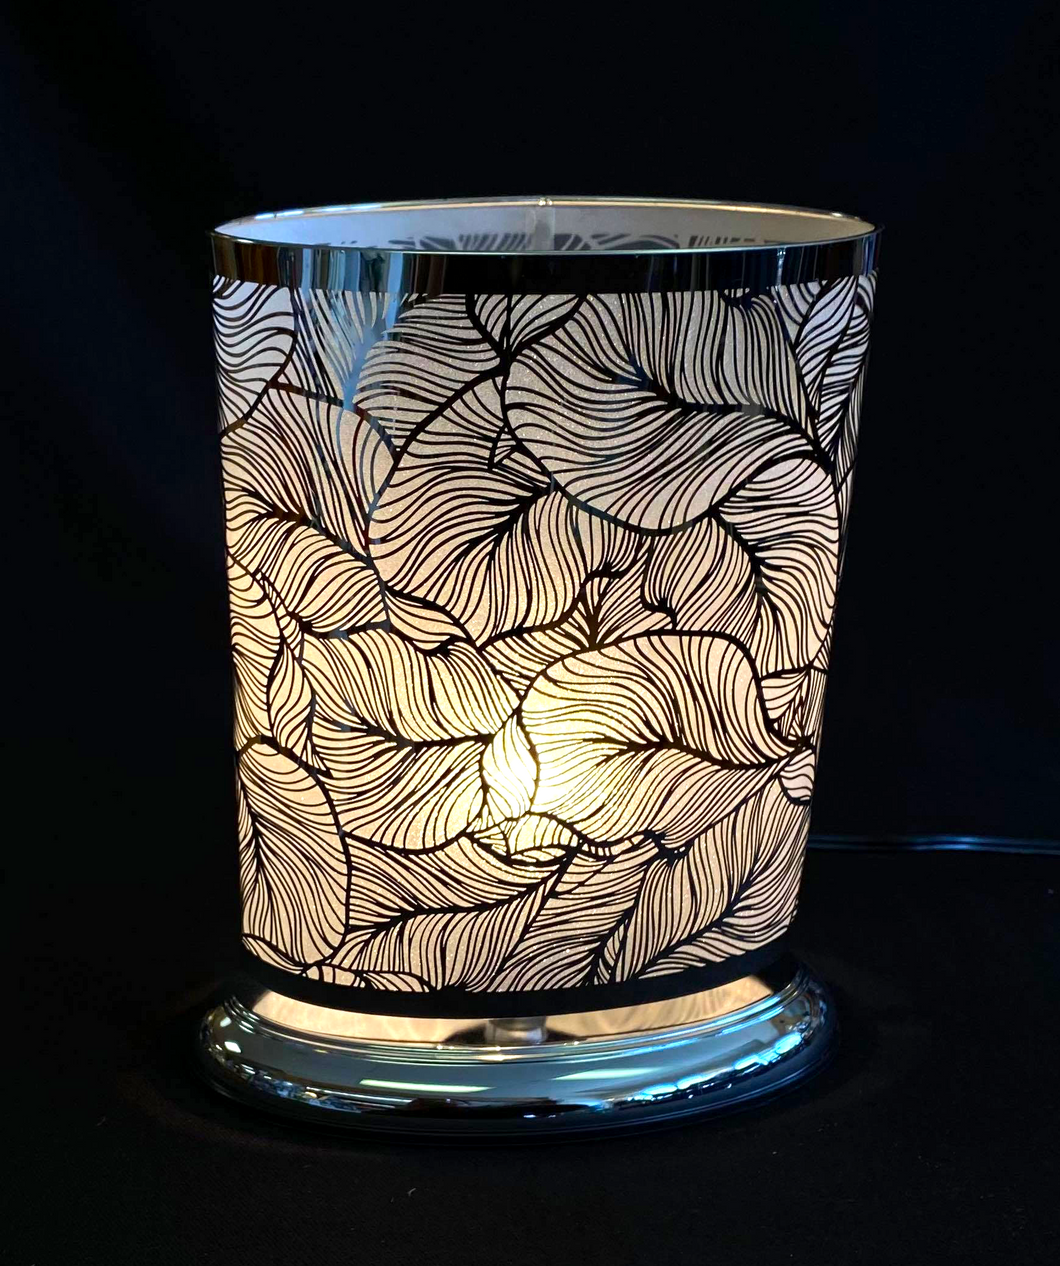 silver oval touch lamp with leaf designs all around 